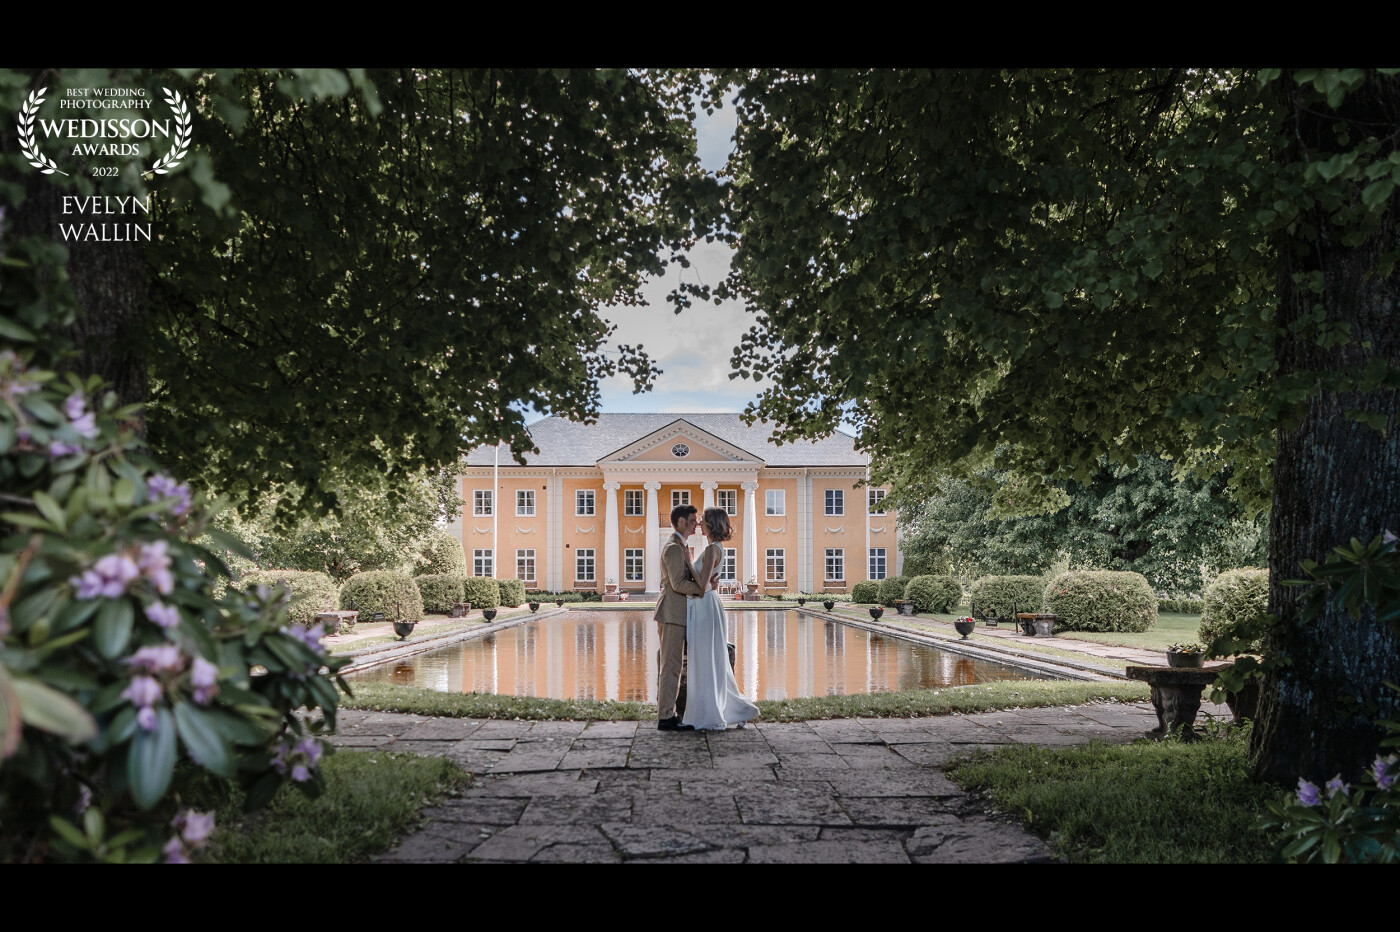 This elopement was the choice by the couple, and they brought their baby with them. As soon as I knew where the ceremony would take place I knew this park would be the perfect spot for portraits. And the framing for me goosebumps! Stunning couple in a beautiful setting!